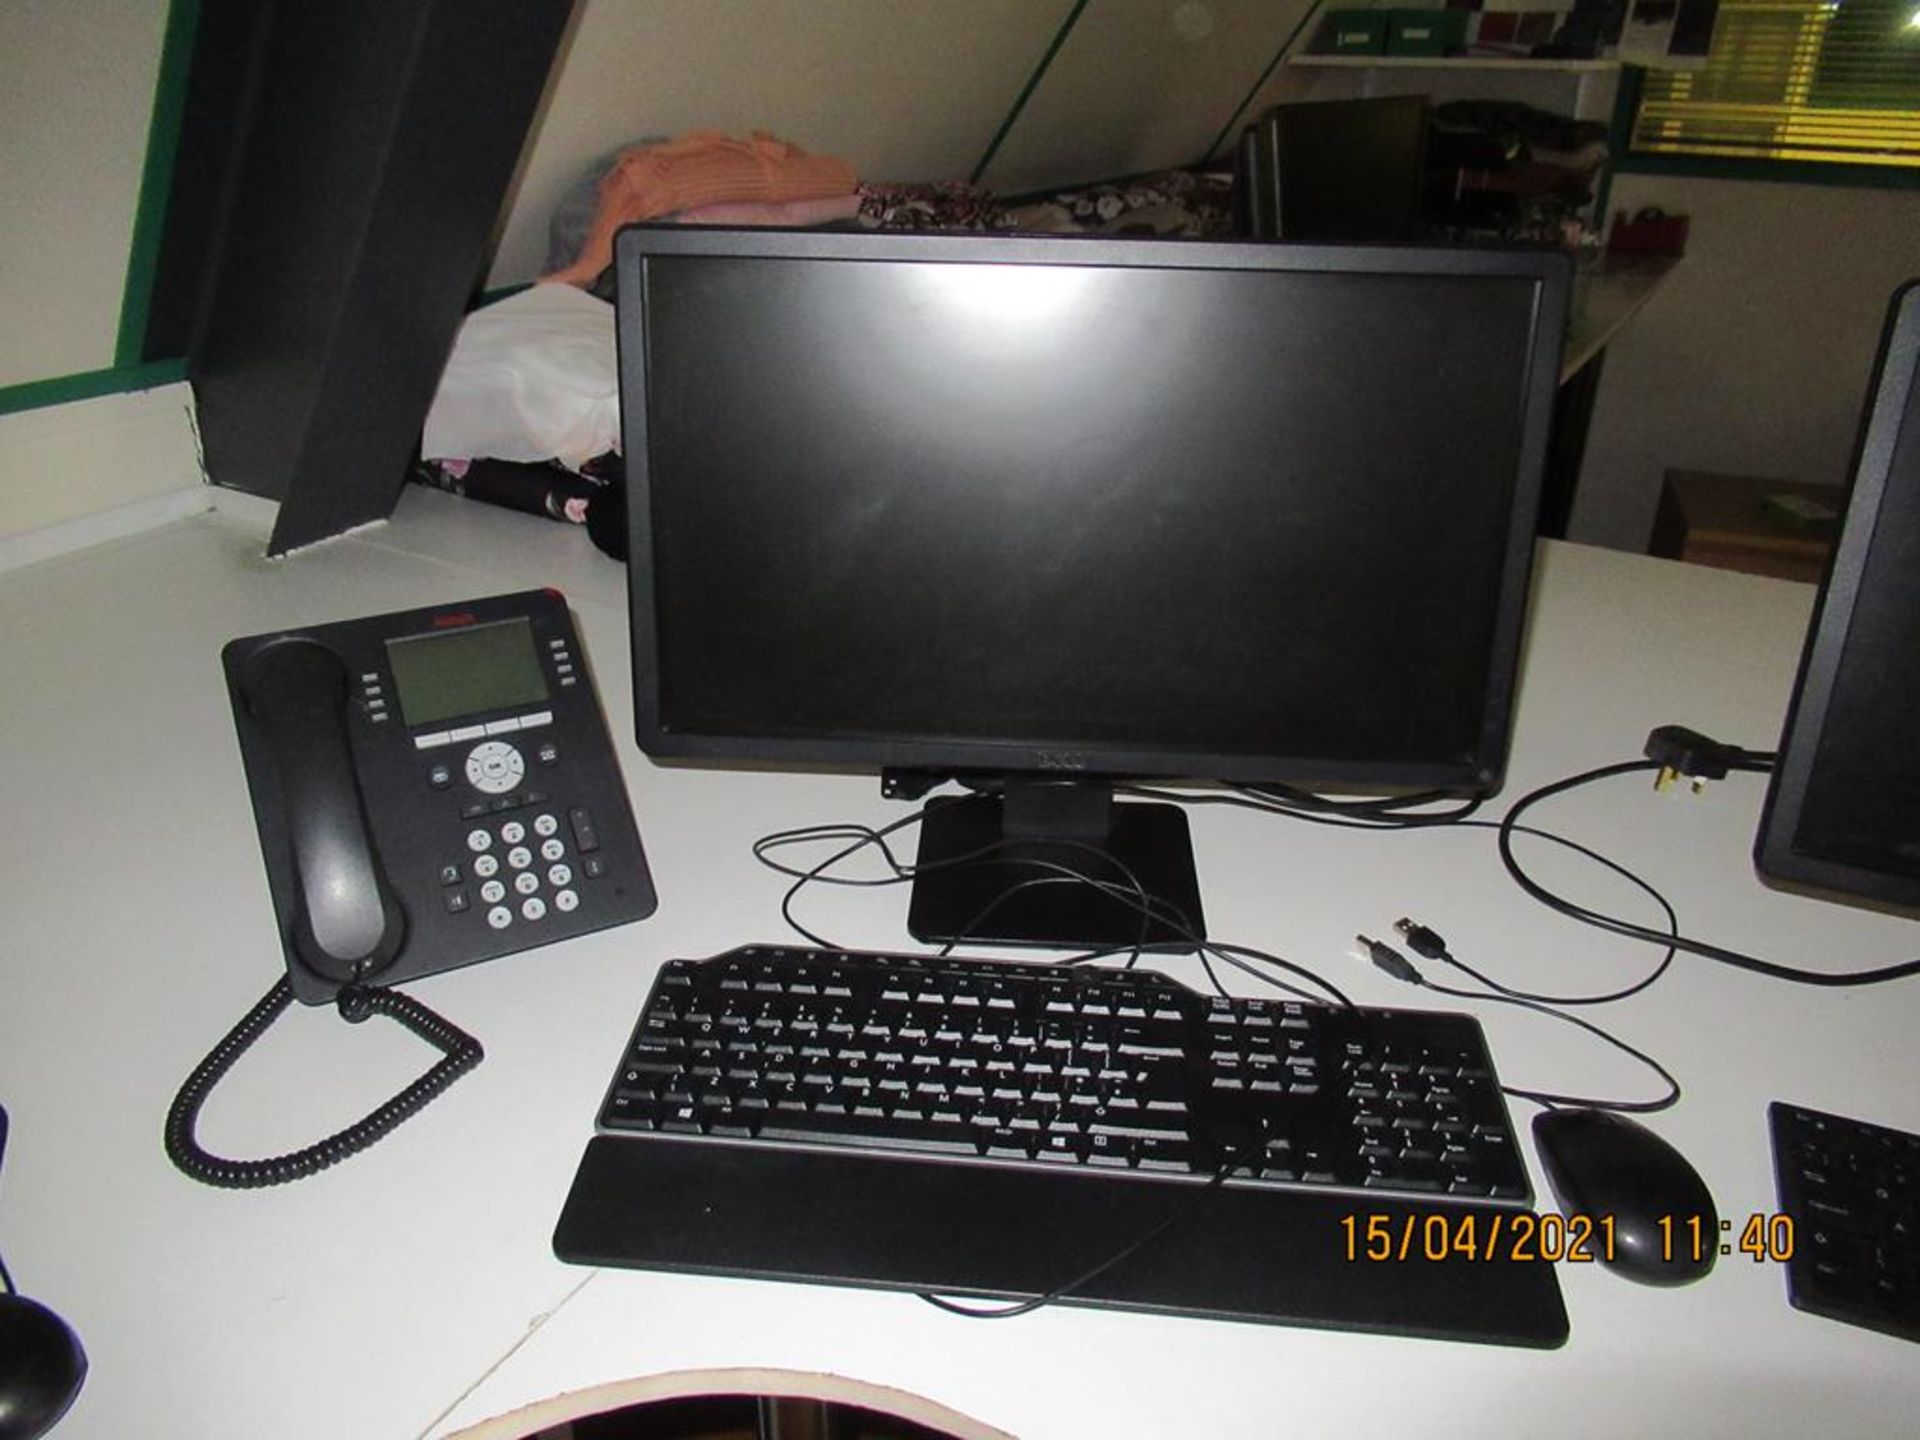 2x Dell Flat Screen Monitors, 2x Keyboards, Mouse - Image 3 of 3